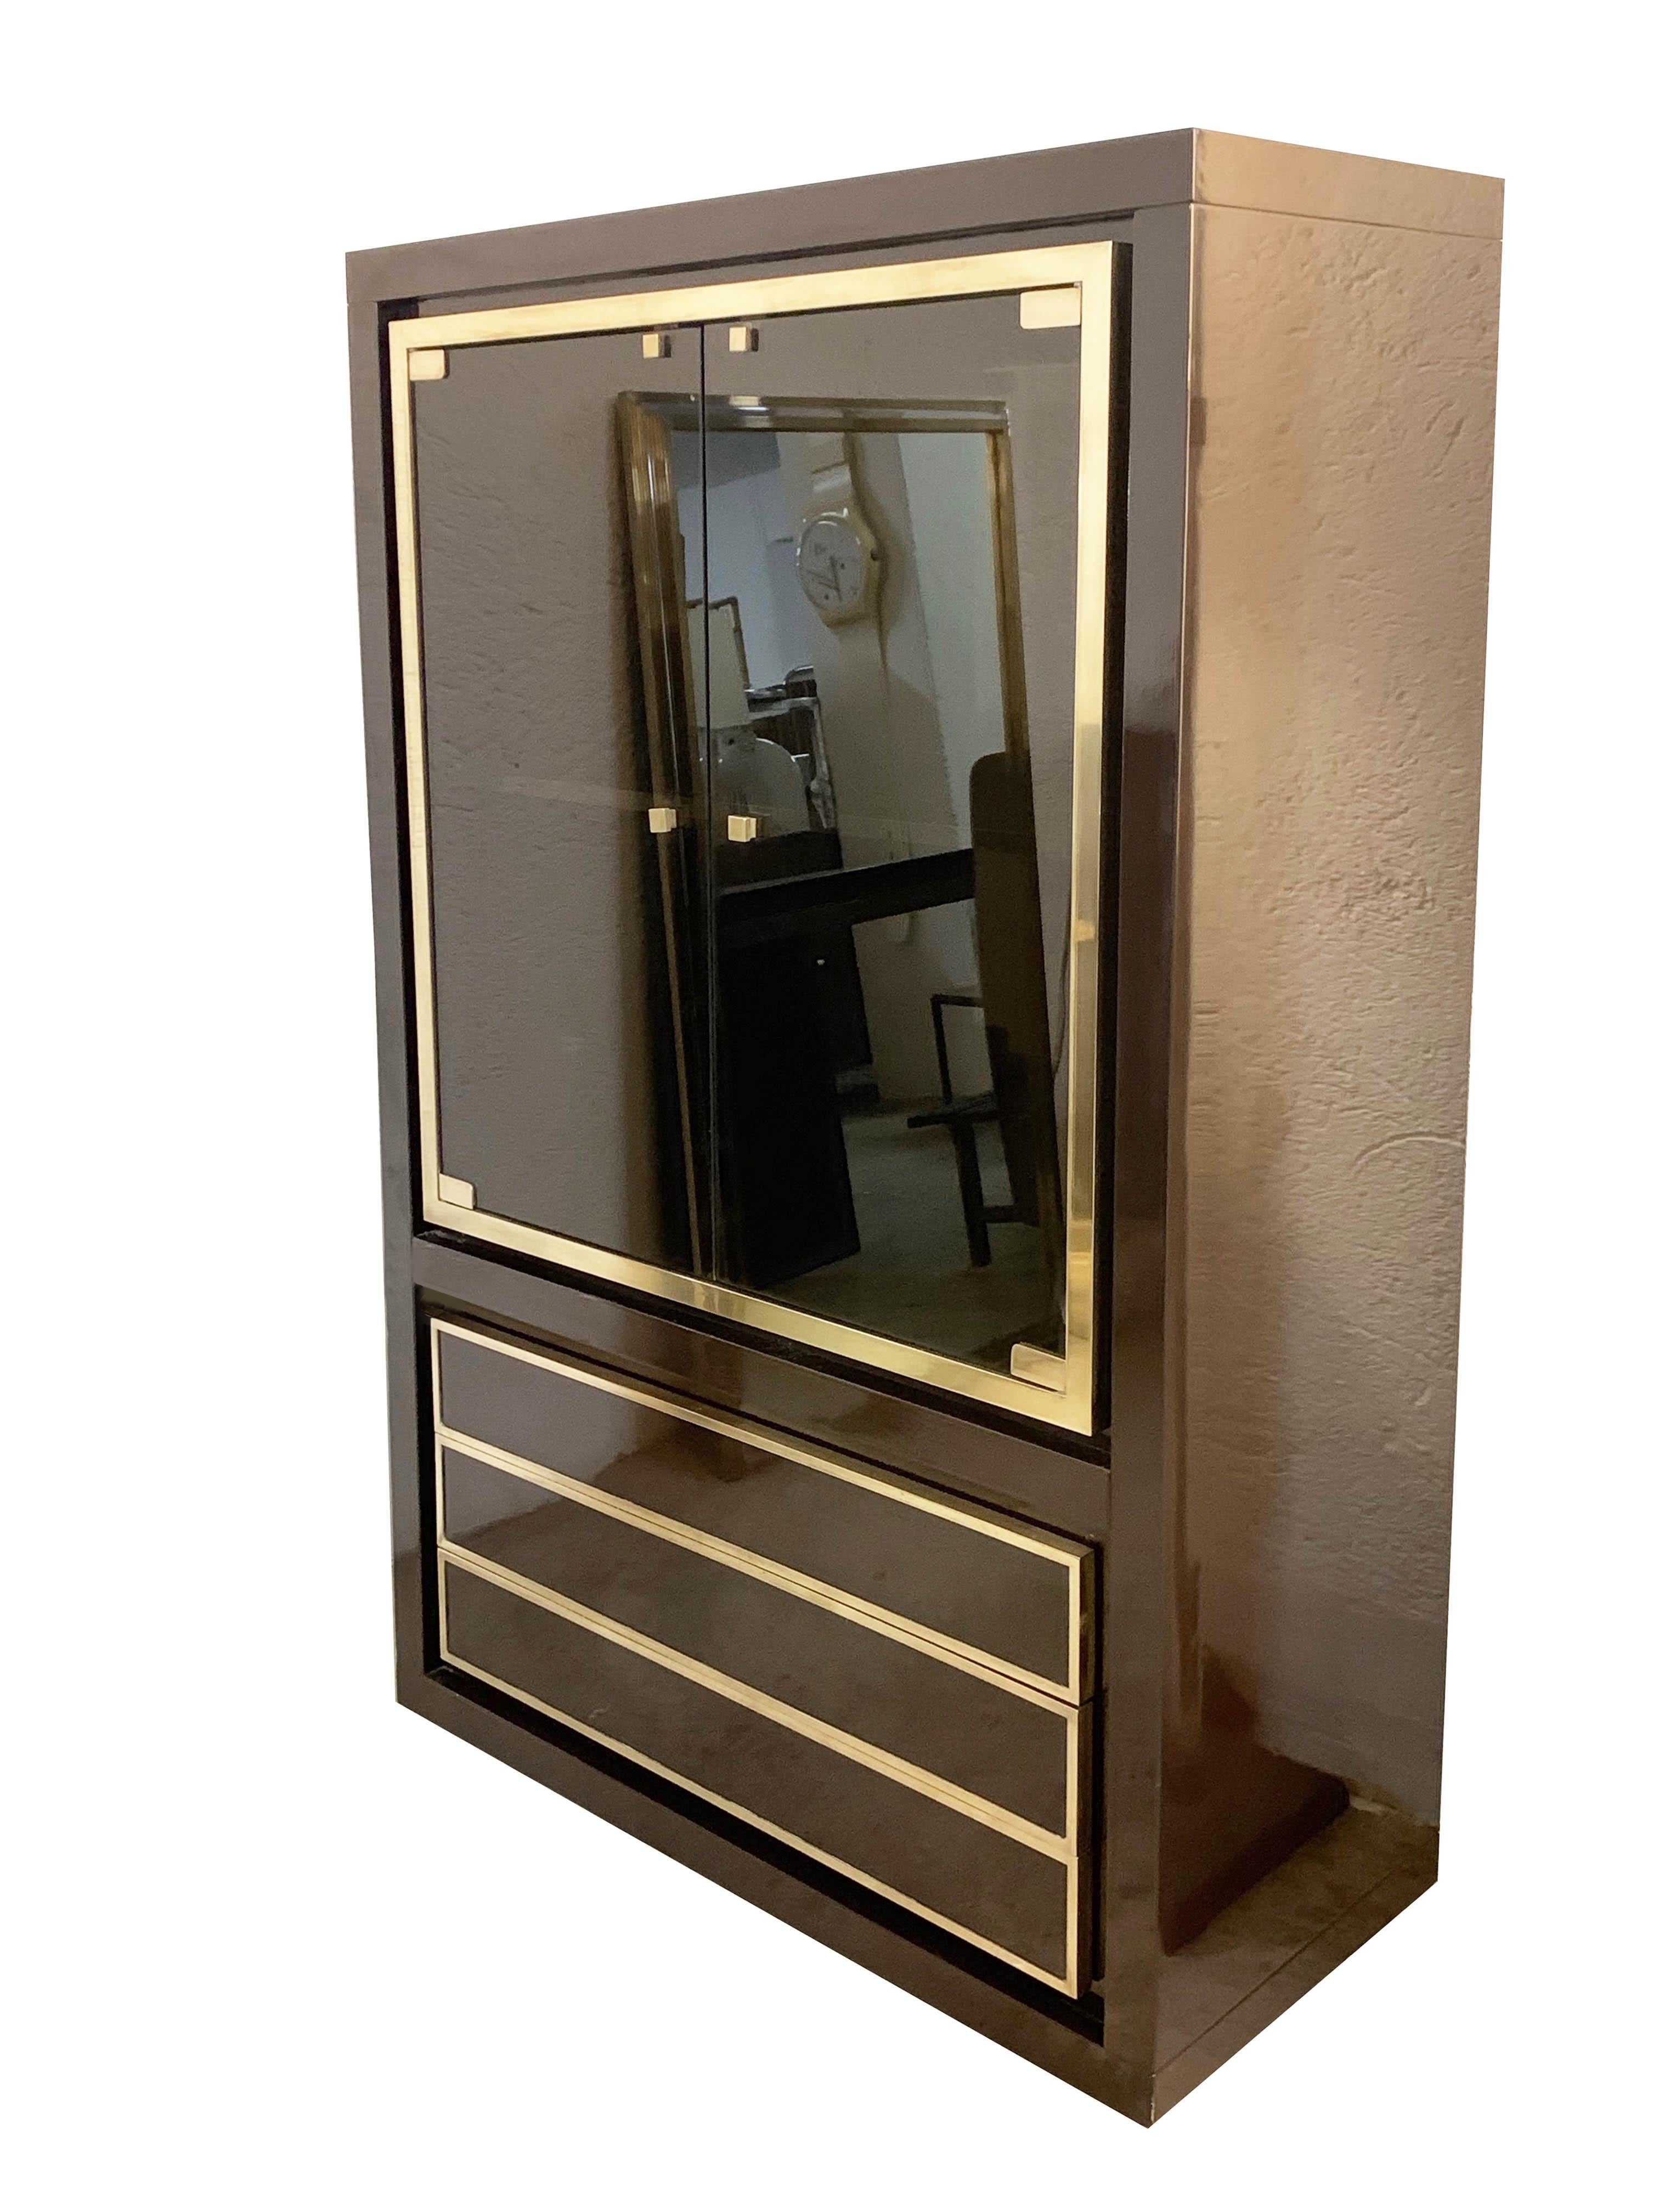 Marvellous and elegant Italian showcase cabinet from 1970.

The excellent quality of dark brown lacquer with glass panels embellished and solid brass is mixed with a lacquered shelf inside and three underlying drawers framed in solid brass. It is